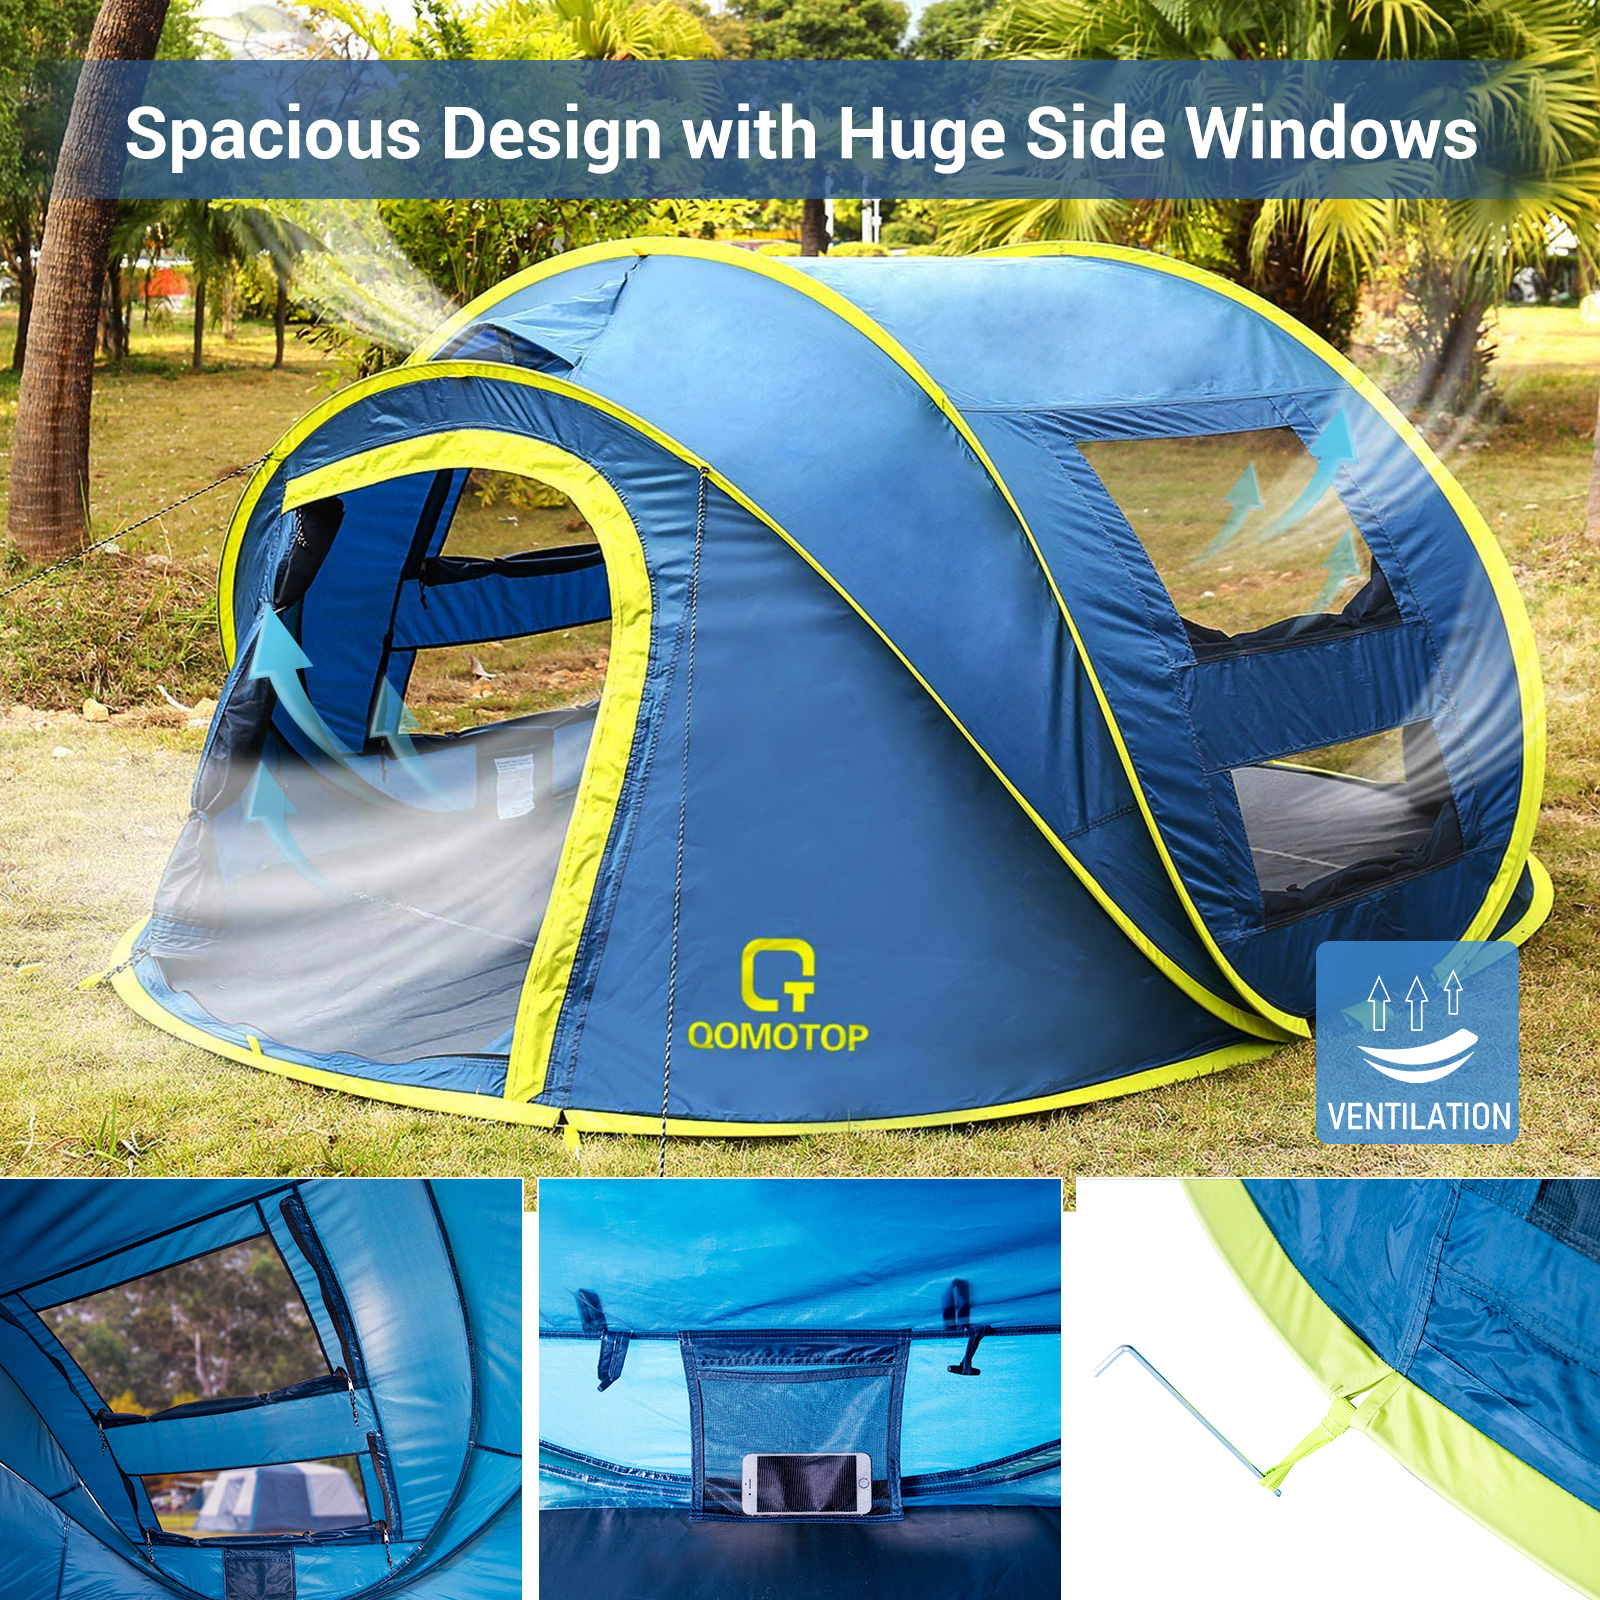 QOMOTOP Instant Tent 4-Person Camp Tent, Automatic Setup Pop Up Tent, Waterproof, Huge Side Screen Windows, Blue - image 4 of 8